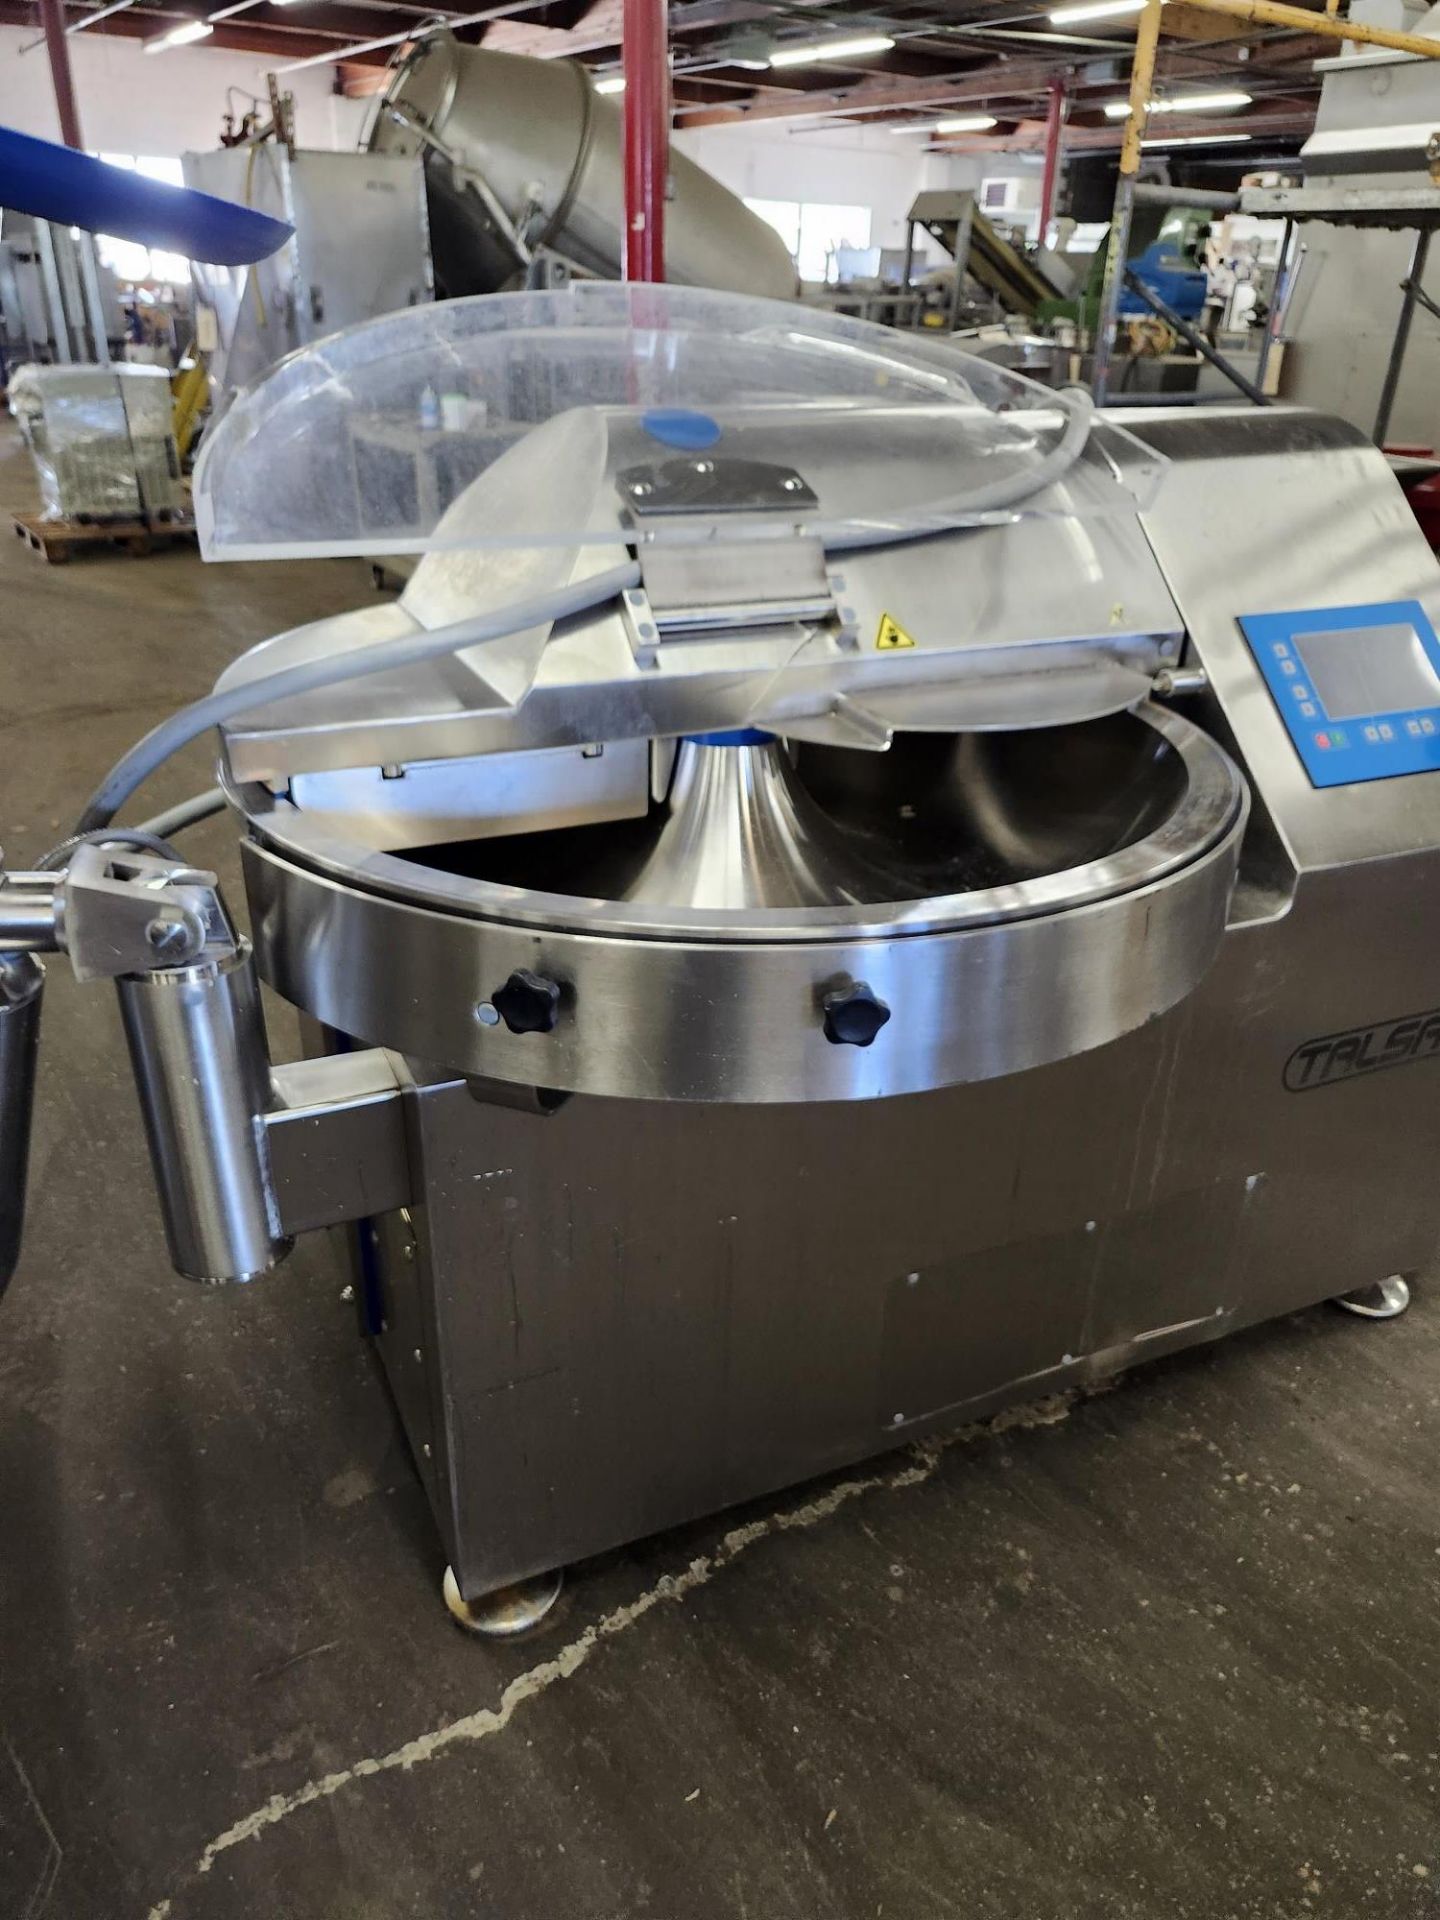 Talsa Mdl. K120 Bowl Chopper, 220 volts, 3 phase, 60 hz (Located in Sandwich, IL) - Image 3 of 10